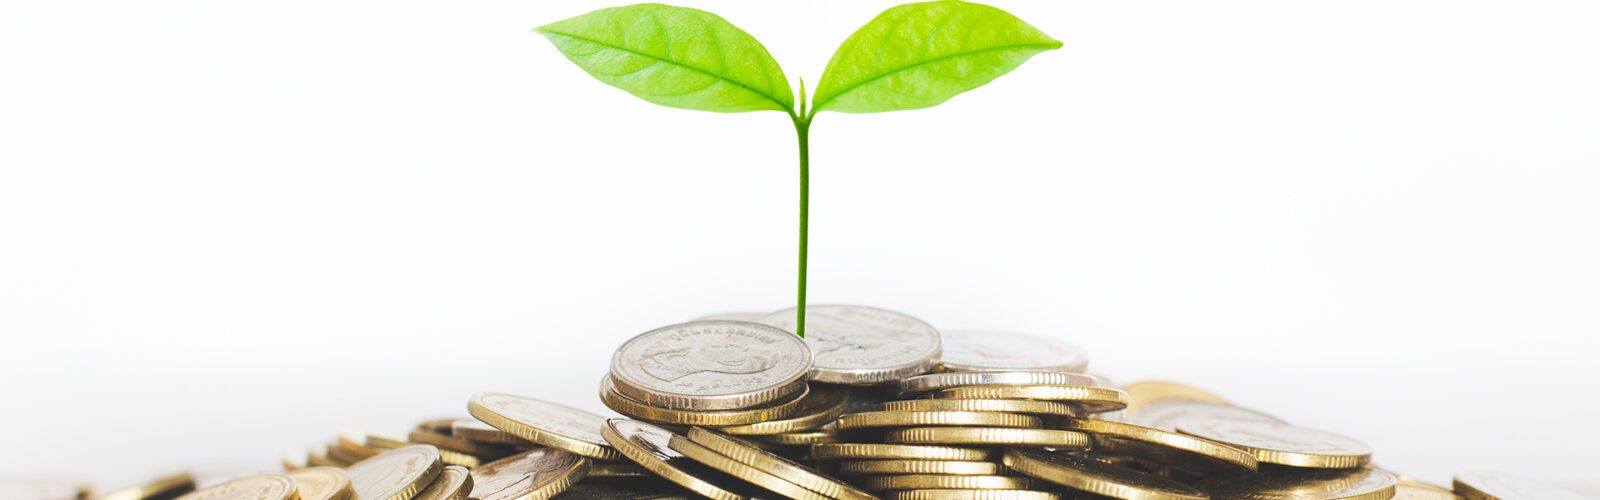 Green seed growth on coins stack with white background. money saving. business investment successful growing concept.